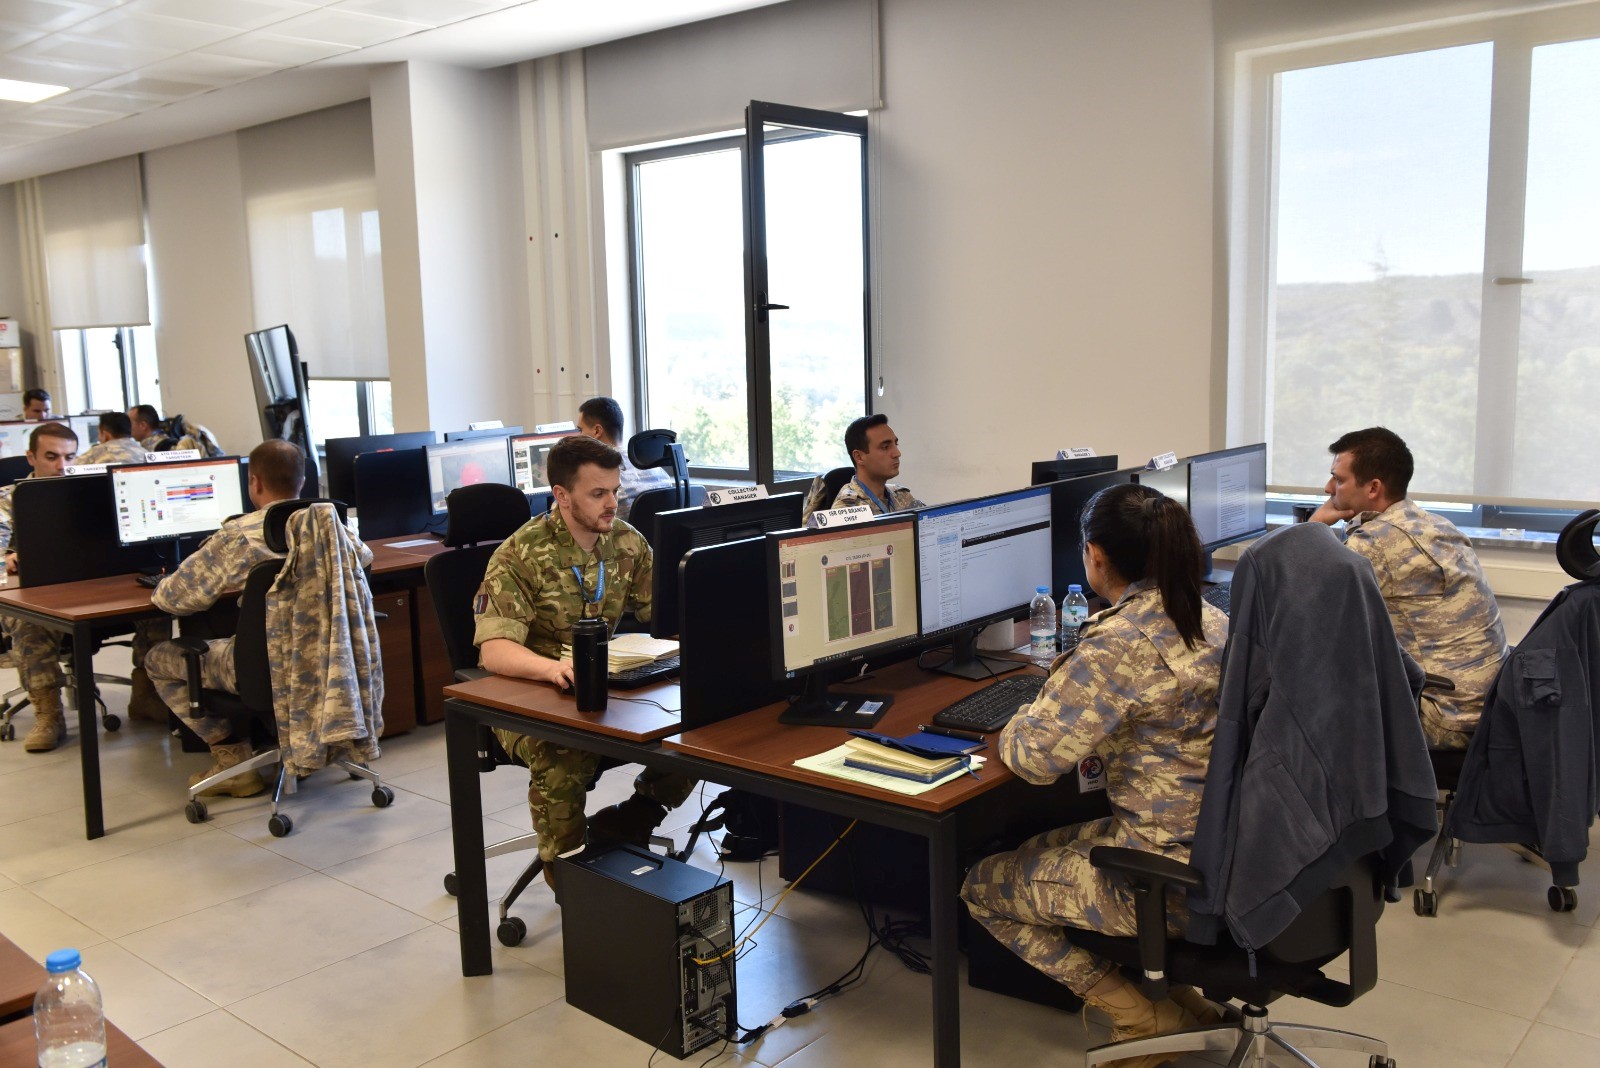 Image shows personnel sitting in an office.